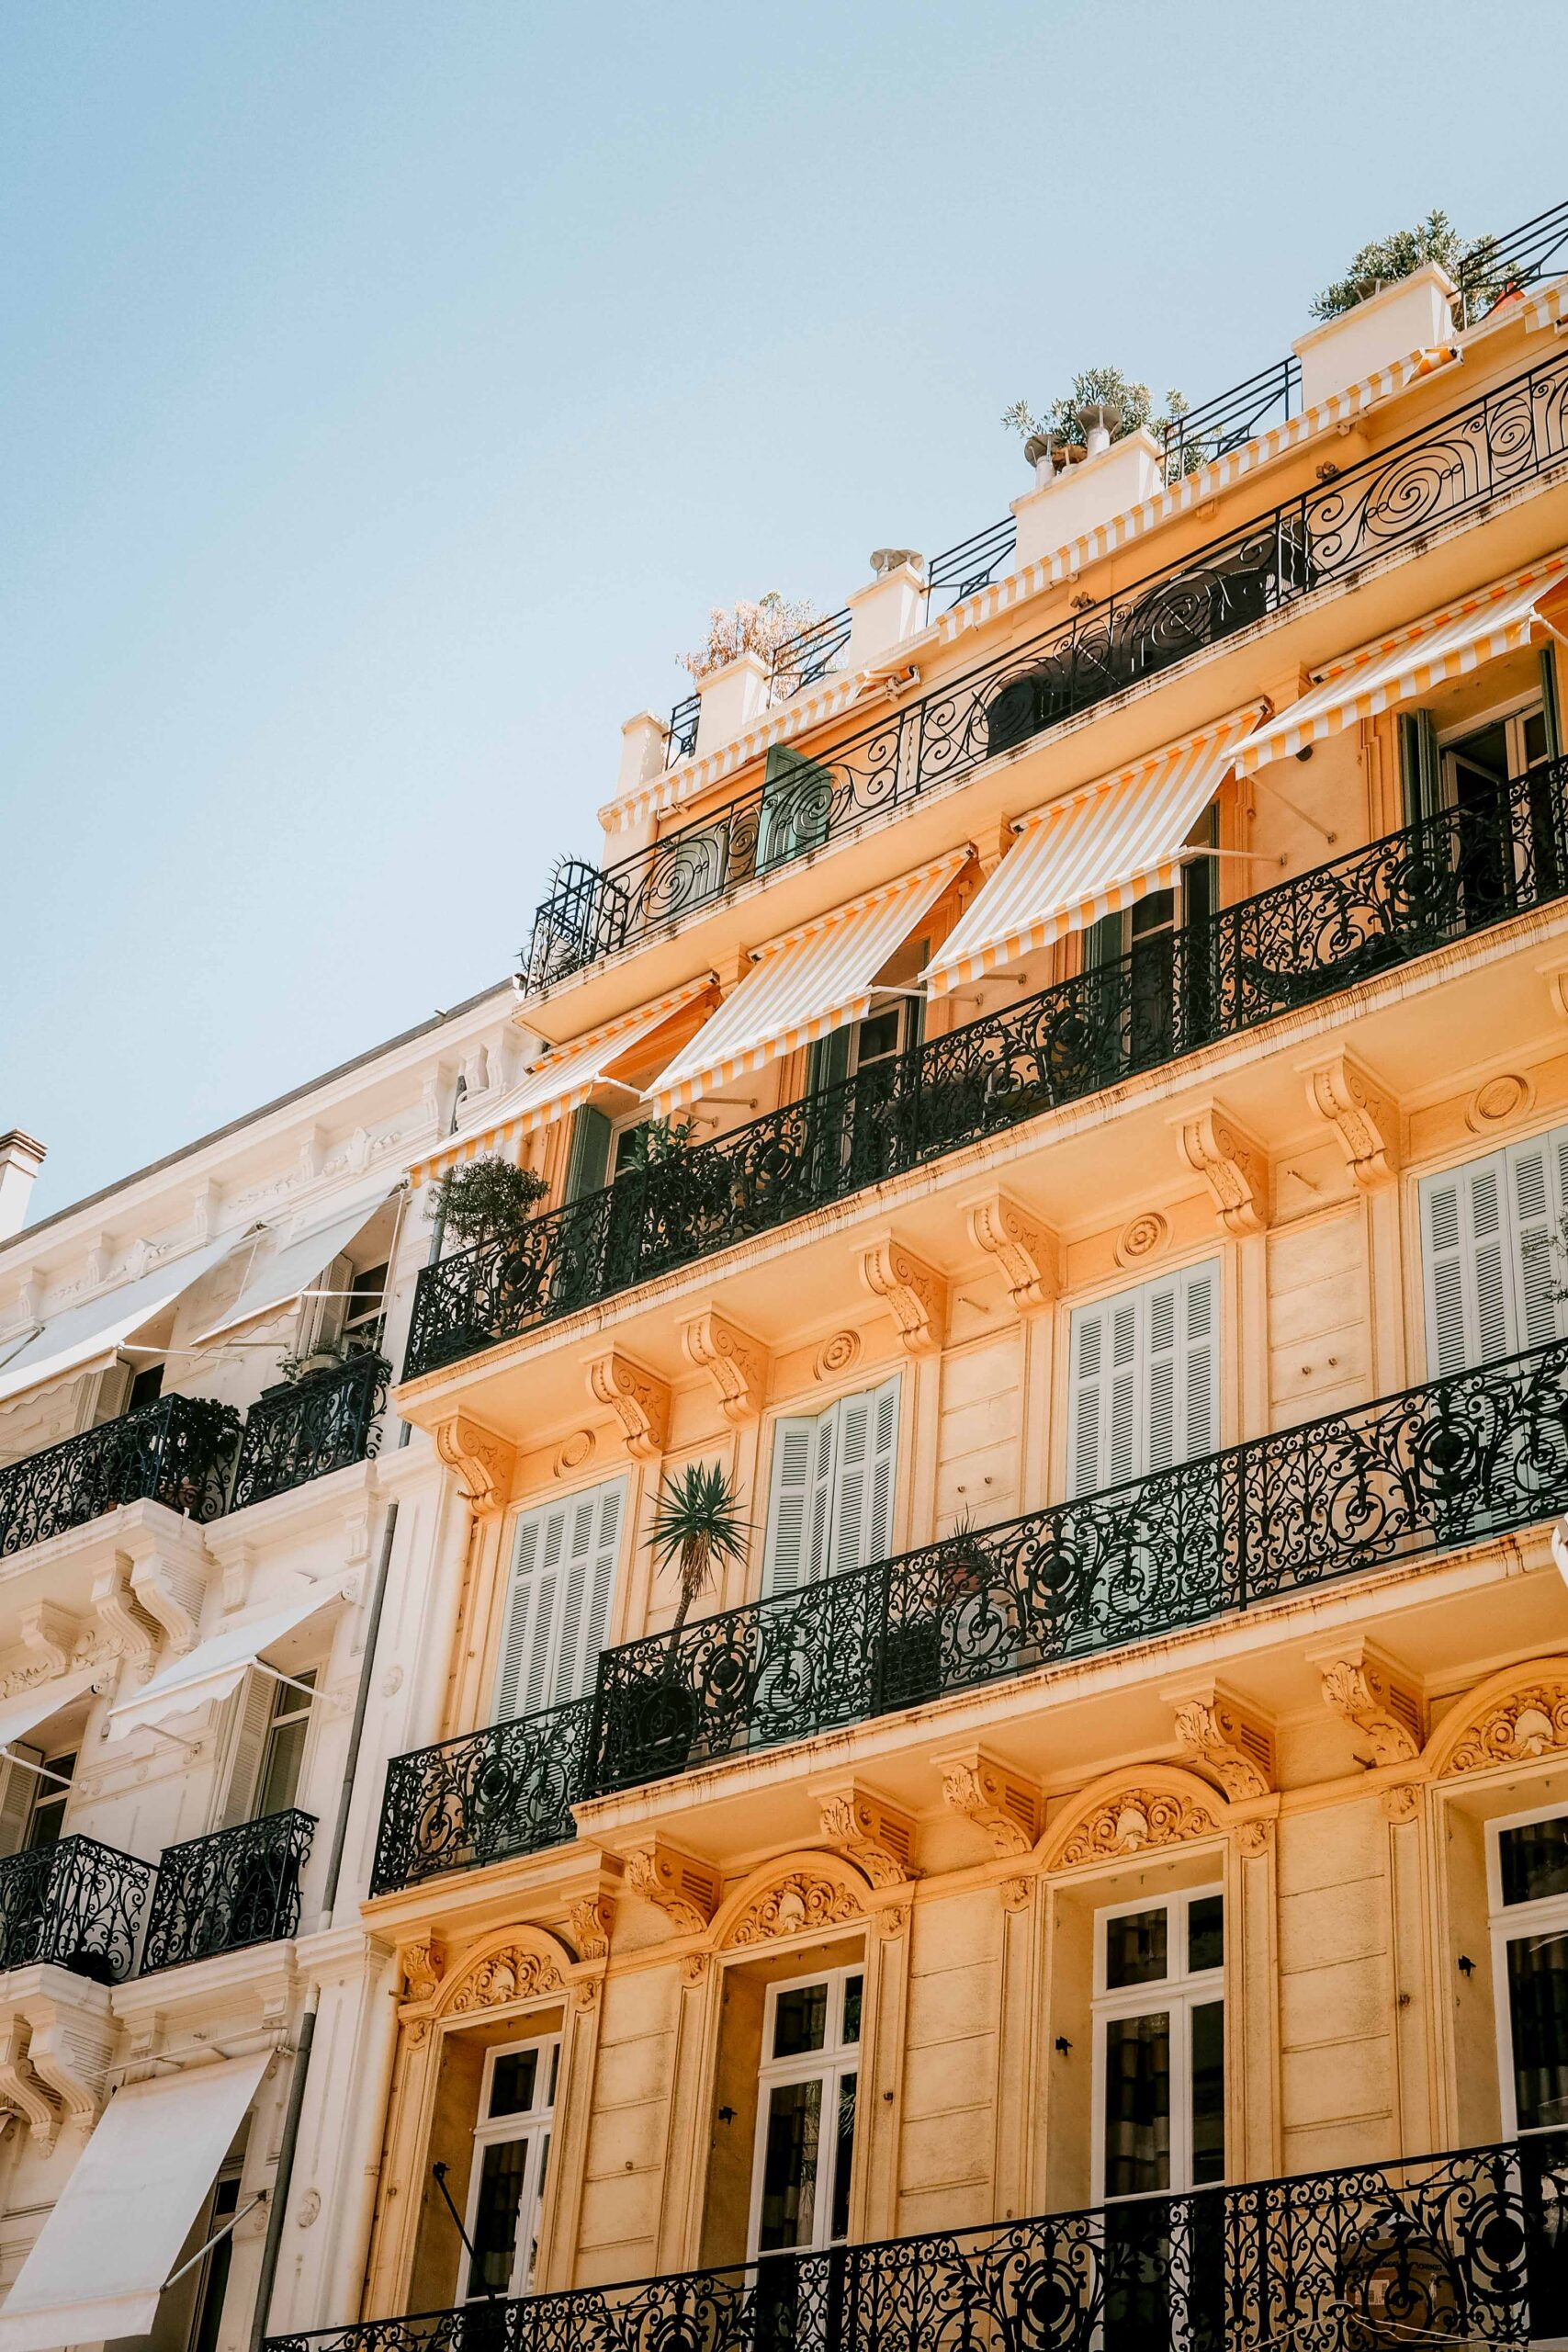 Details of the facade of a yellow fancy building as seen from the Boulevard de la Croisette in Cannes, France